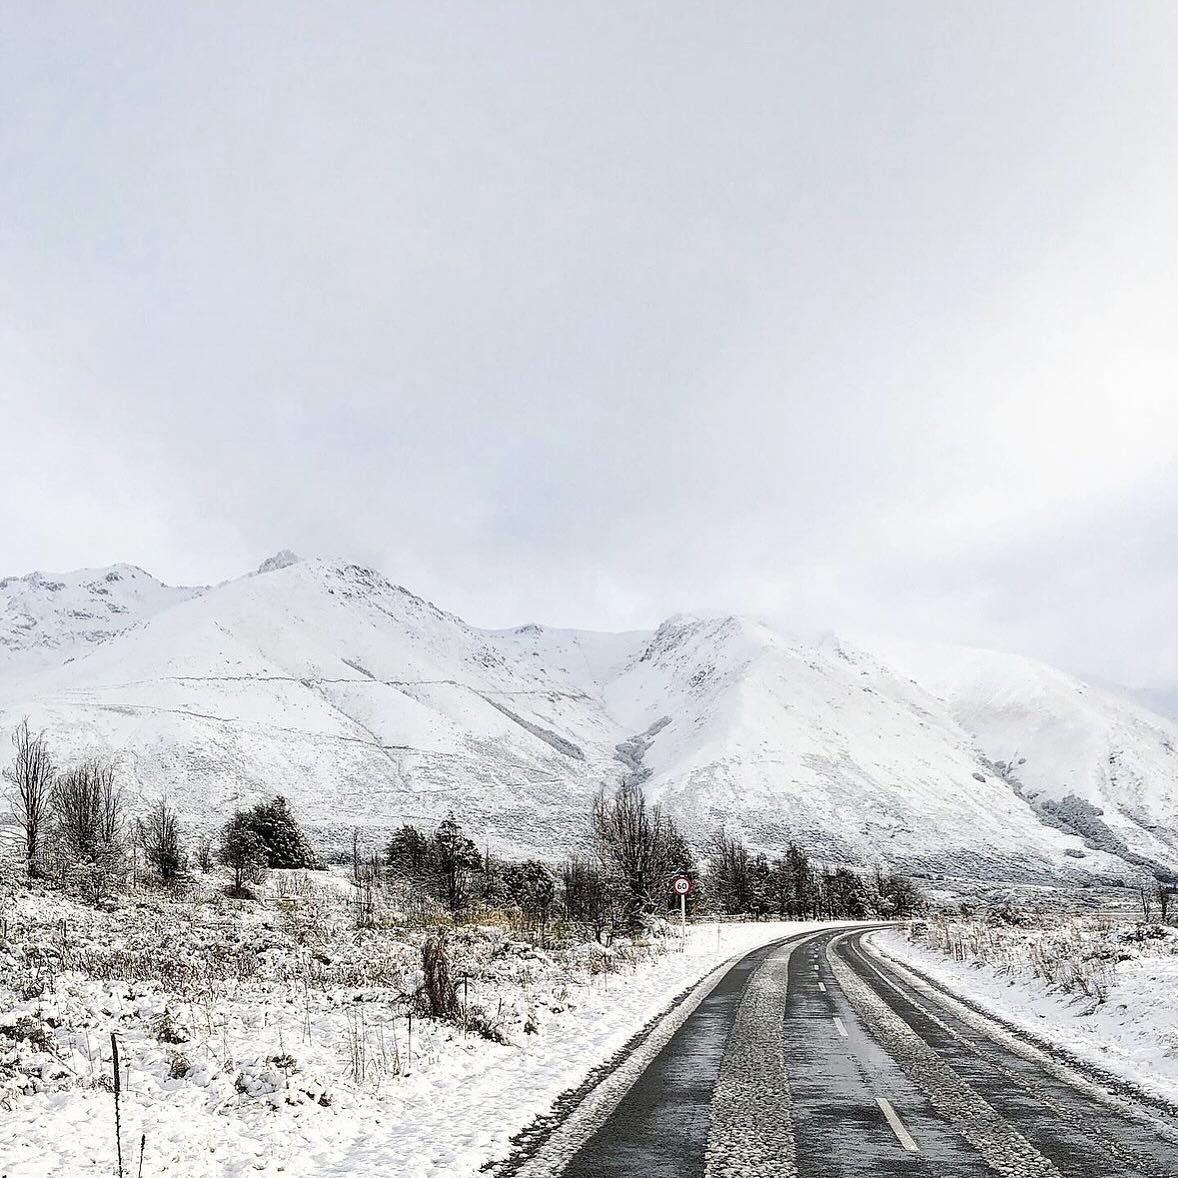 Now is the time to visit the Waitaki Winter wonderland and head for the hills @ohausnow @lakeohaulodge to stay, soak up the scene and enjoy some local PINOT NOIR fireside 🍷

Our wine comes from Waitaki Valley &ndash; where limestone soils, dry summe